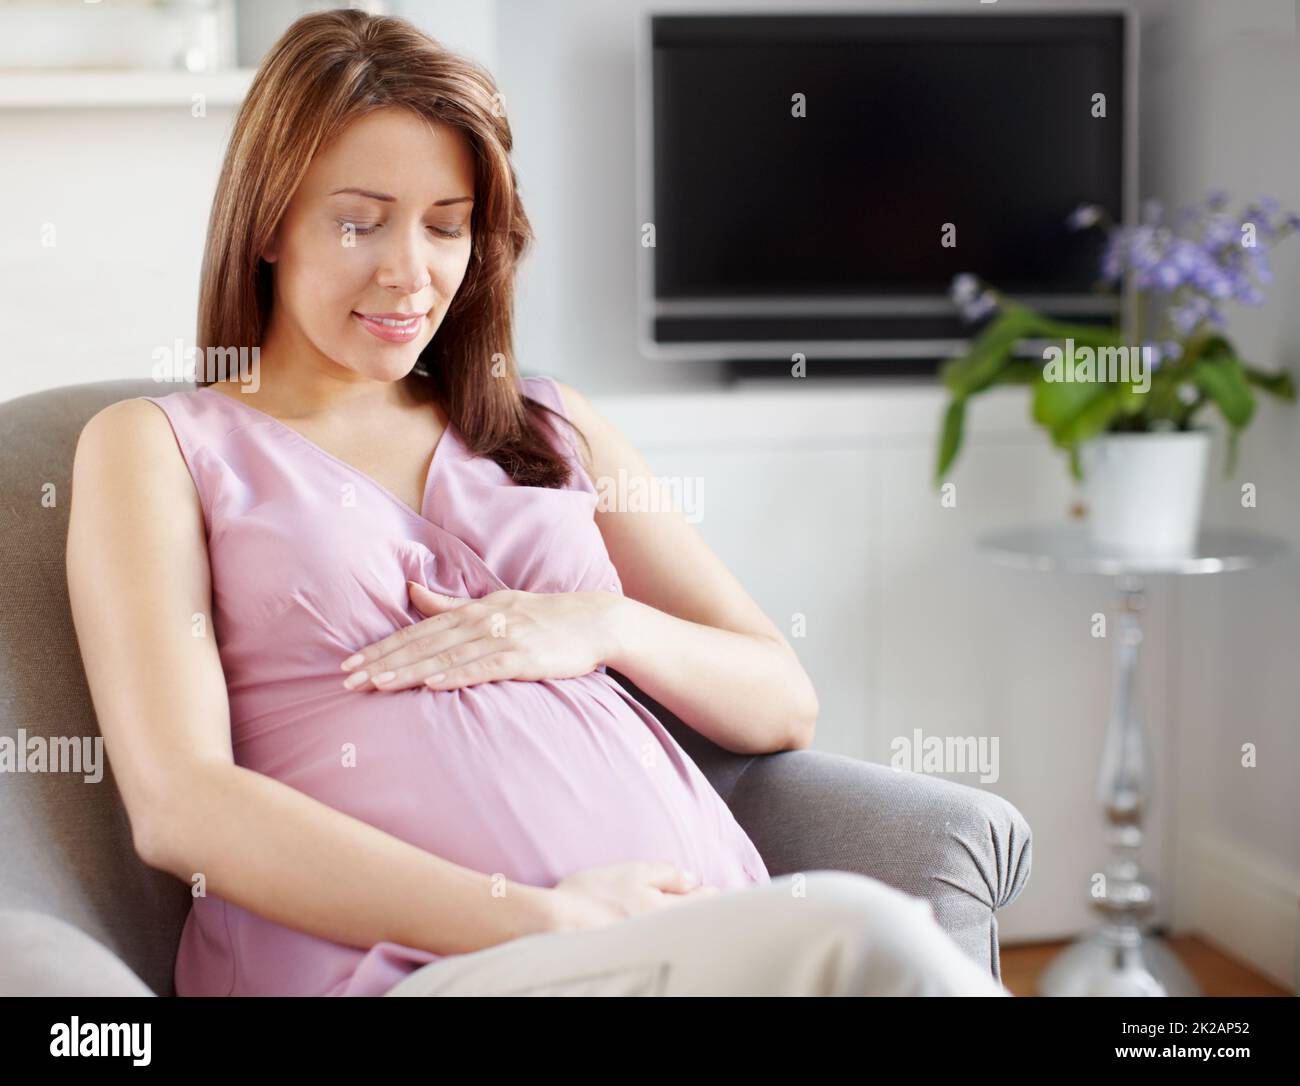 Not long now.... A glowing pregnant woman looking at her swelling baby bump. Stock Photo